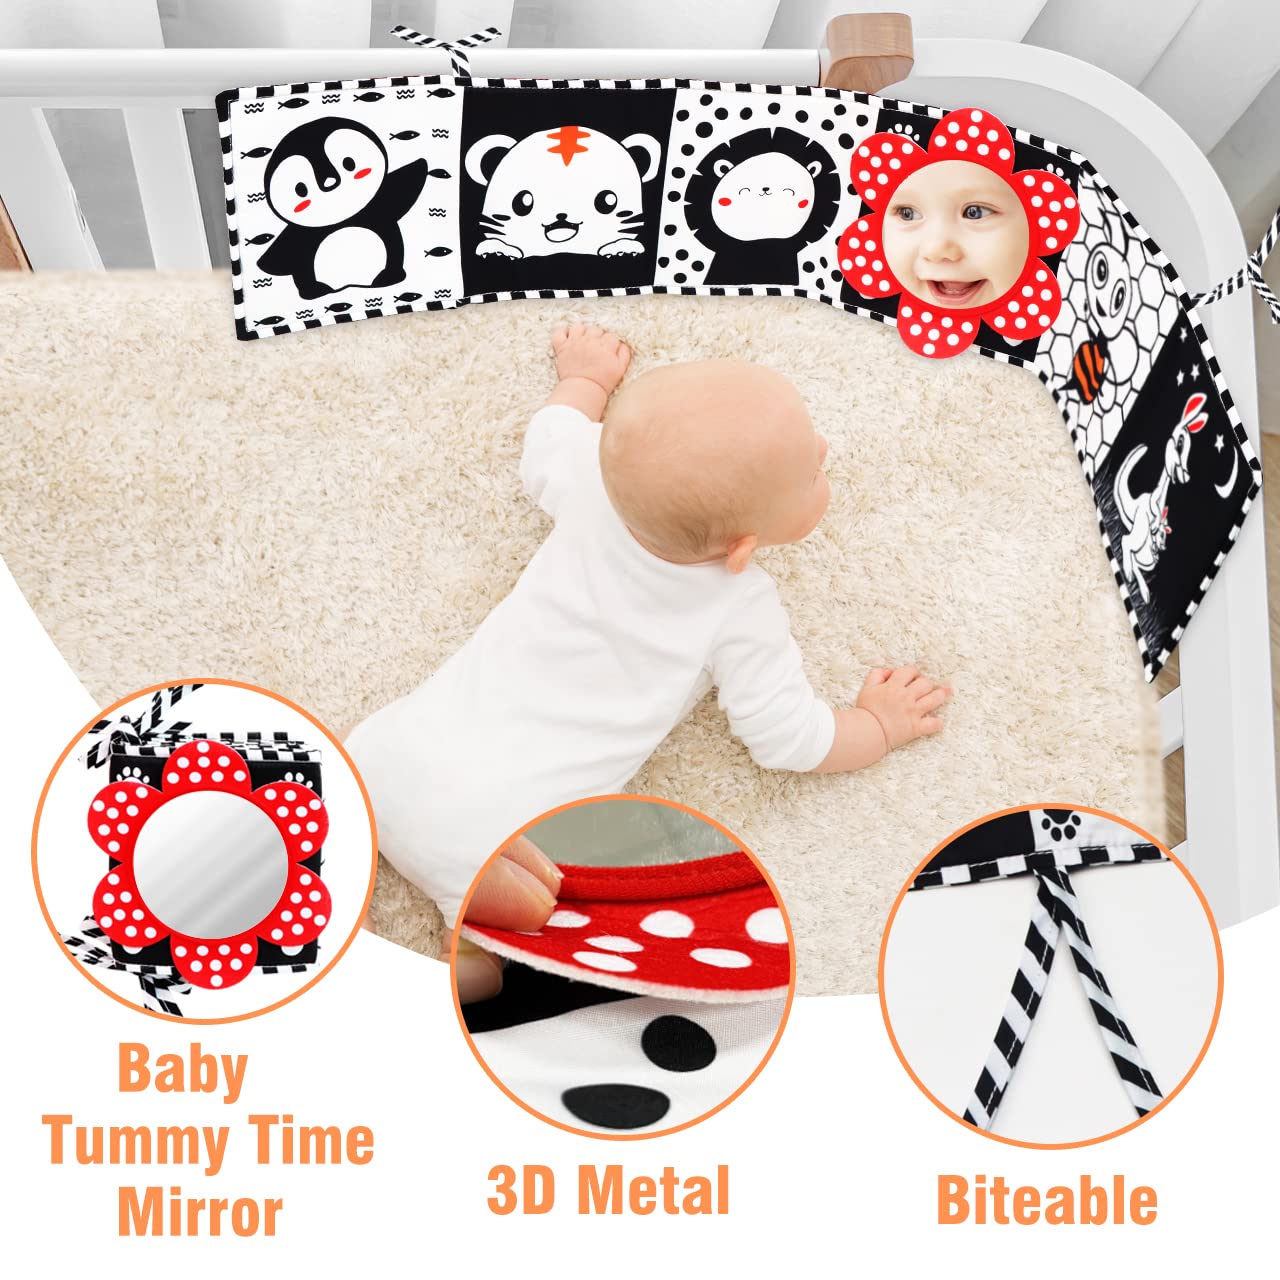 FUNNYB&G Black and White Baby Toys - High Contrast Baby Sensory Book 0-6 6-12 Months for Newborn Brain Development Tummy Time Mirror Toys Infant Montessori Learning Toys for Babies 0-3 3-6 Month